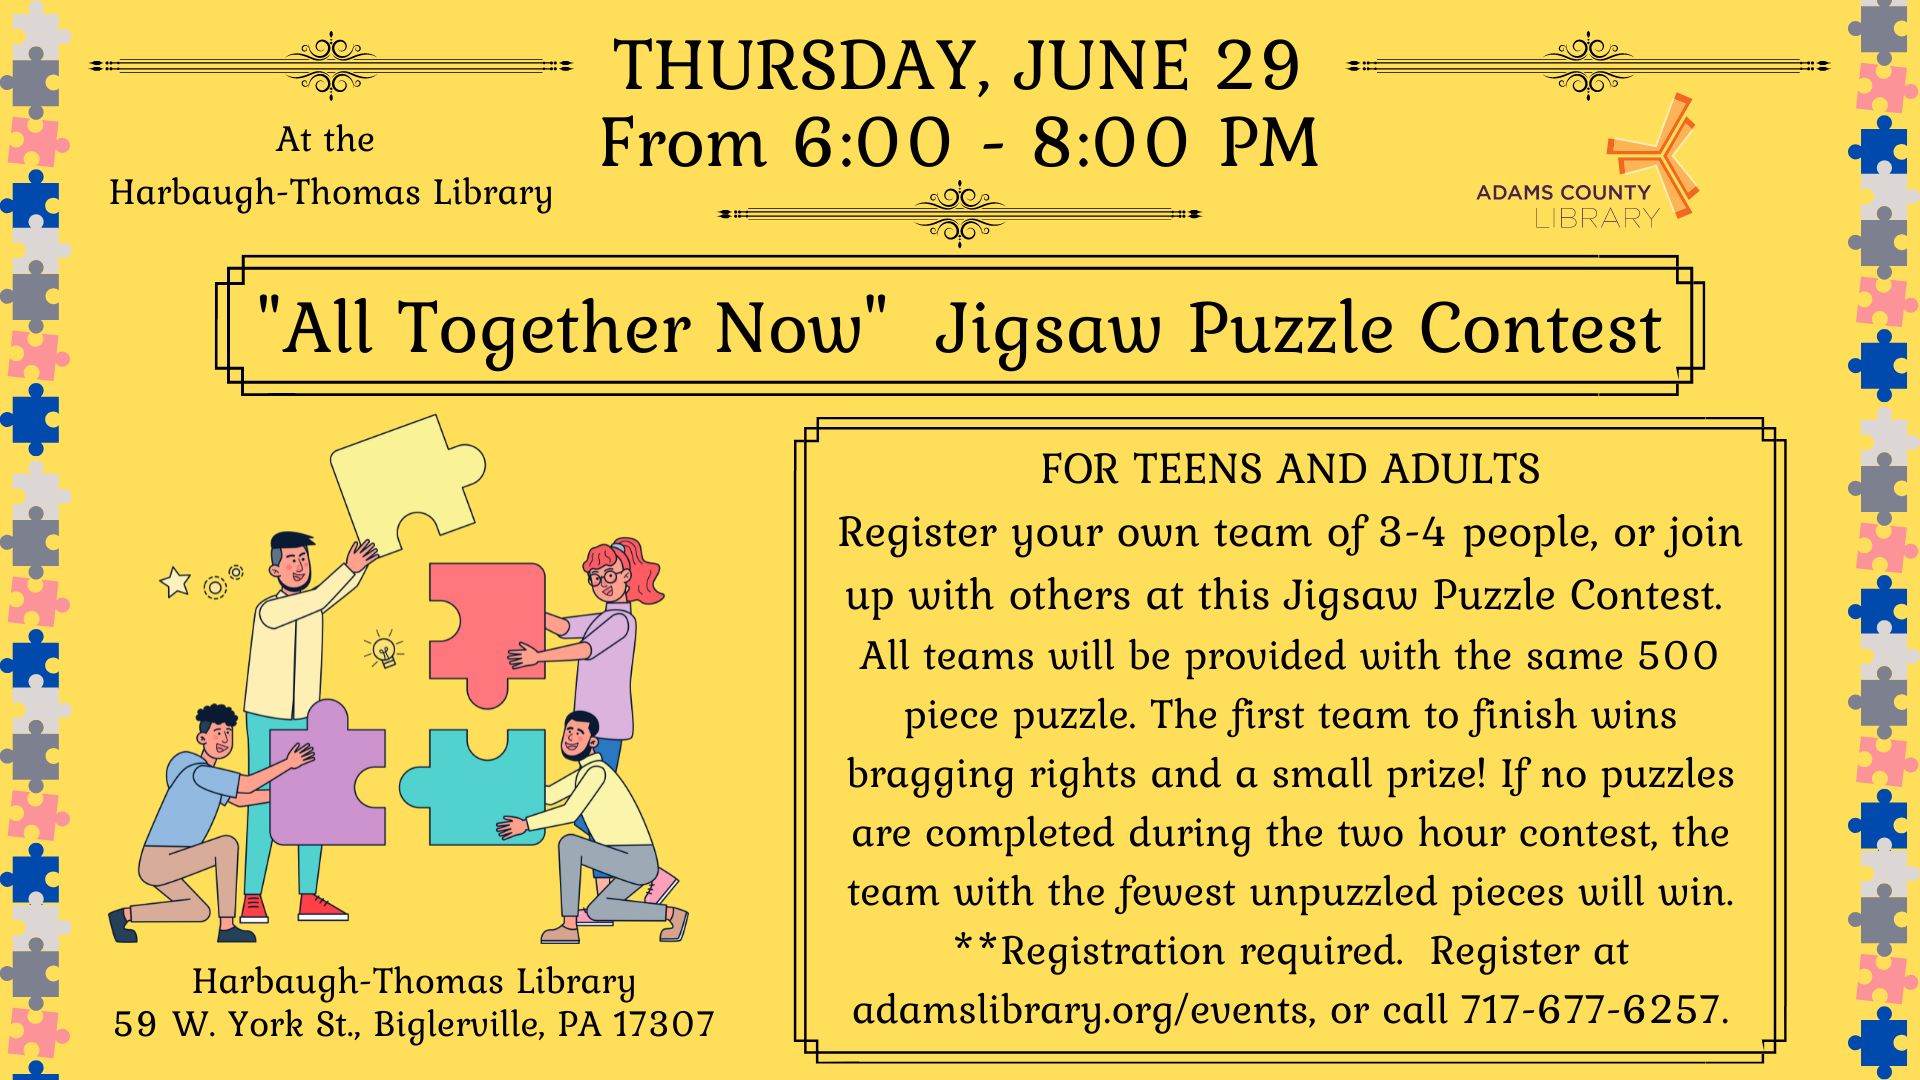 “All Together Now” Jigsaw Puzzle Contest THURSDAY, JUNE 29 6:00-8:00PM